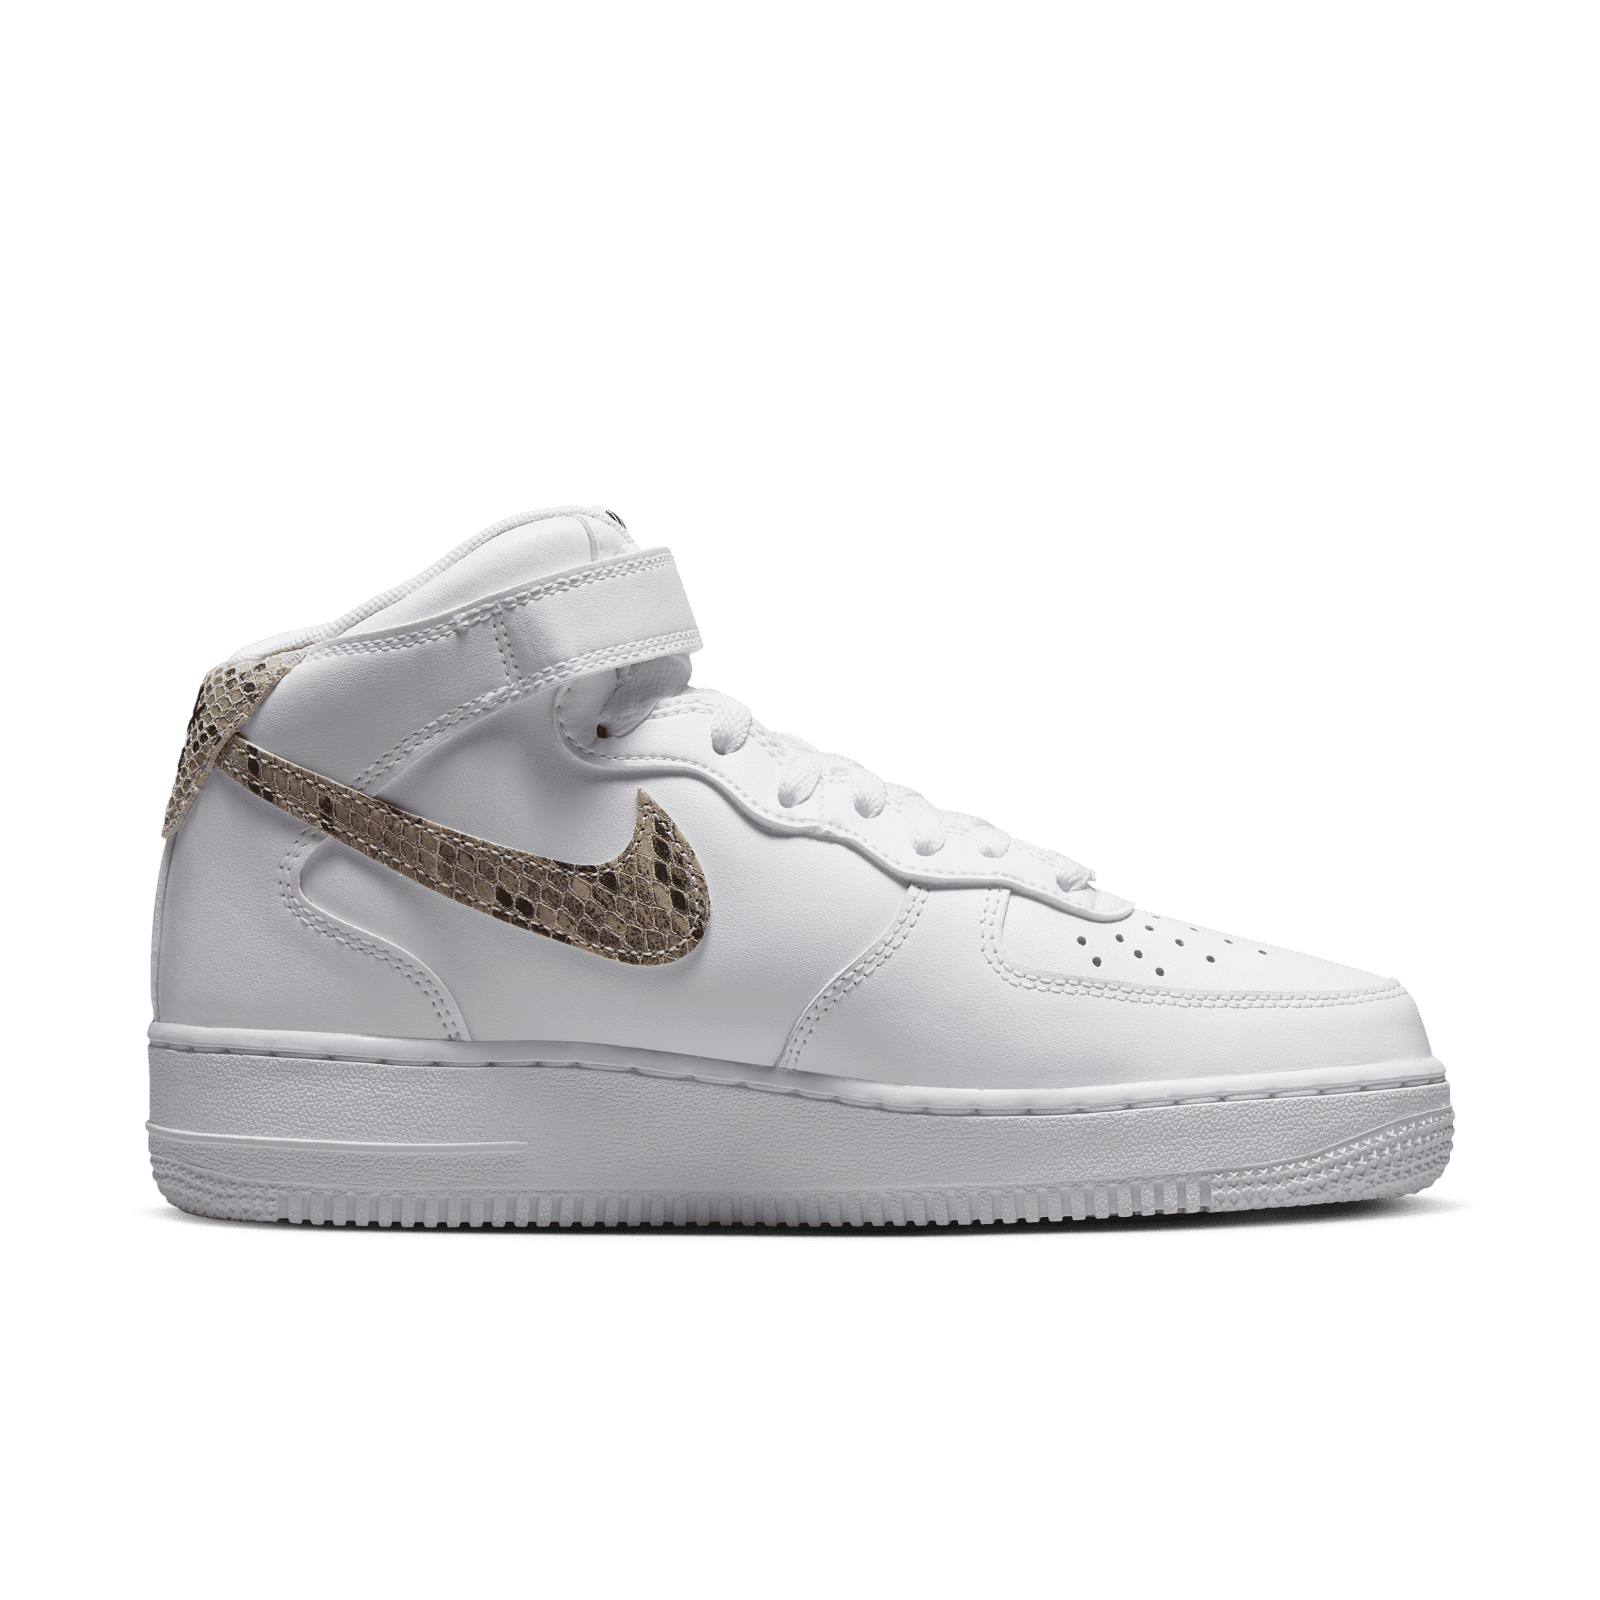 Air Force 1 '07 Mid White Snake Swoosh W